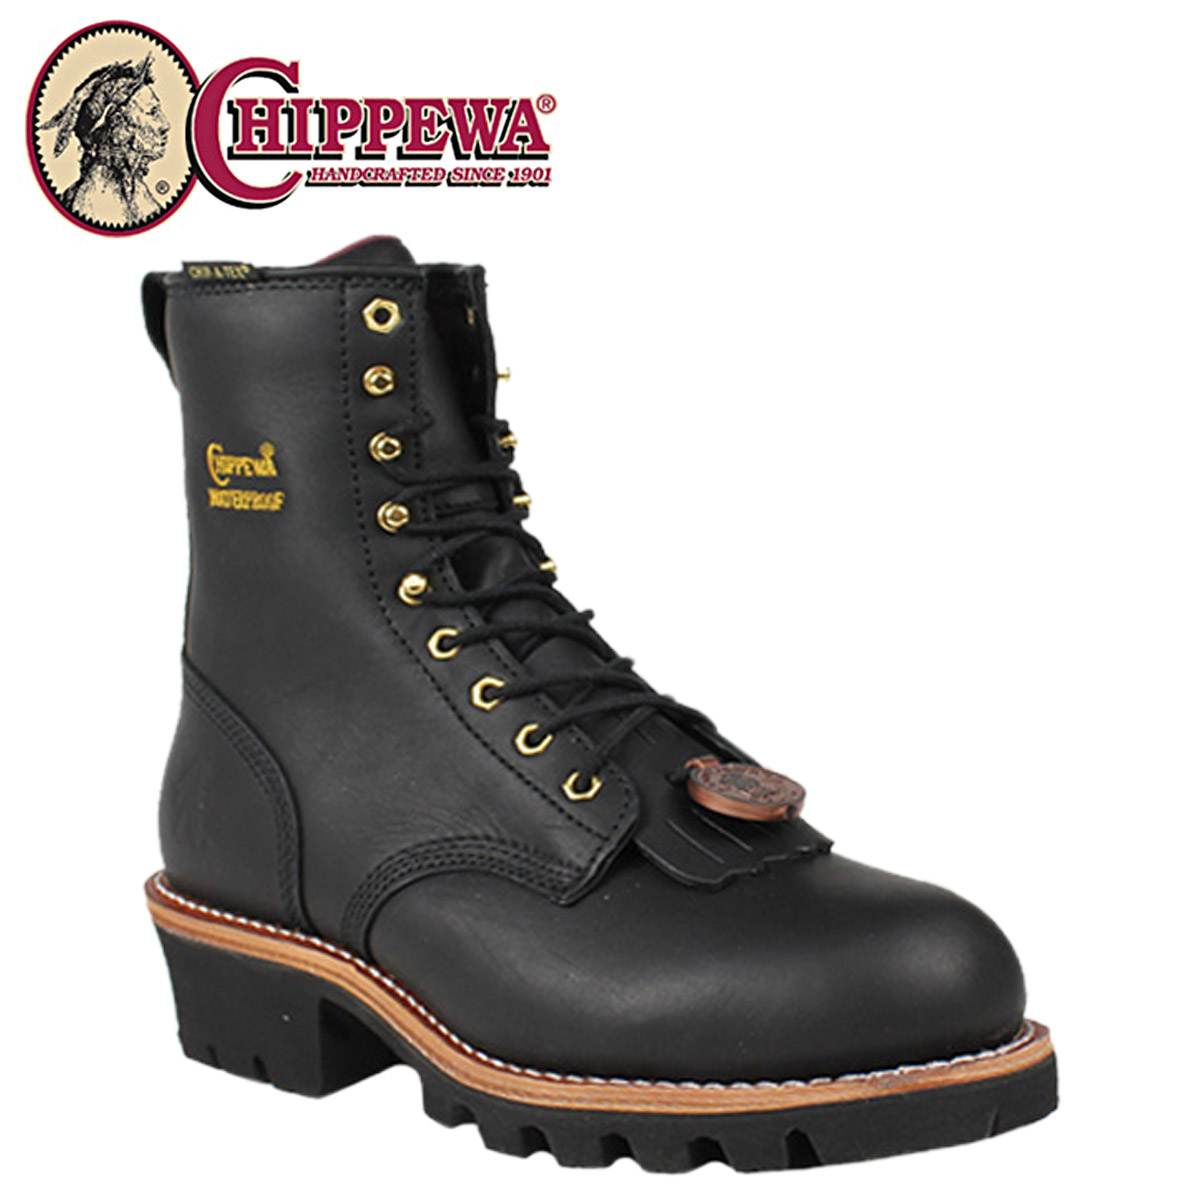 buckler safety boots